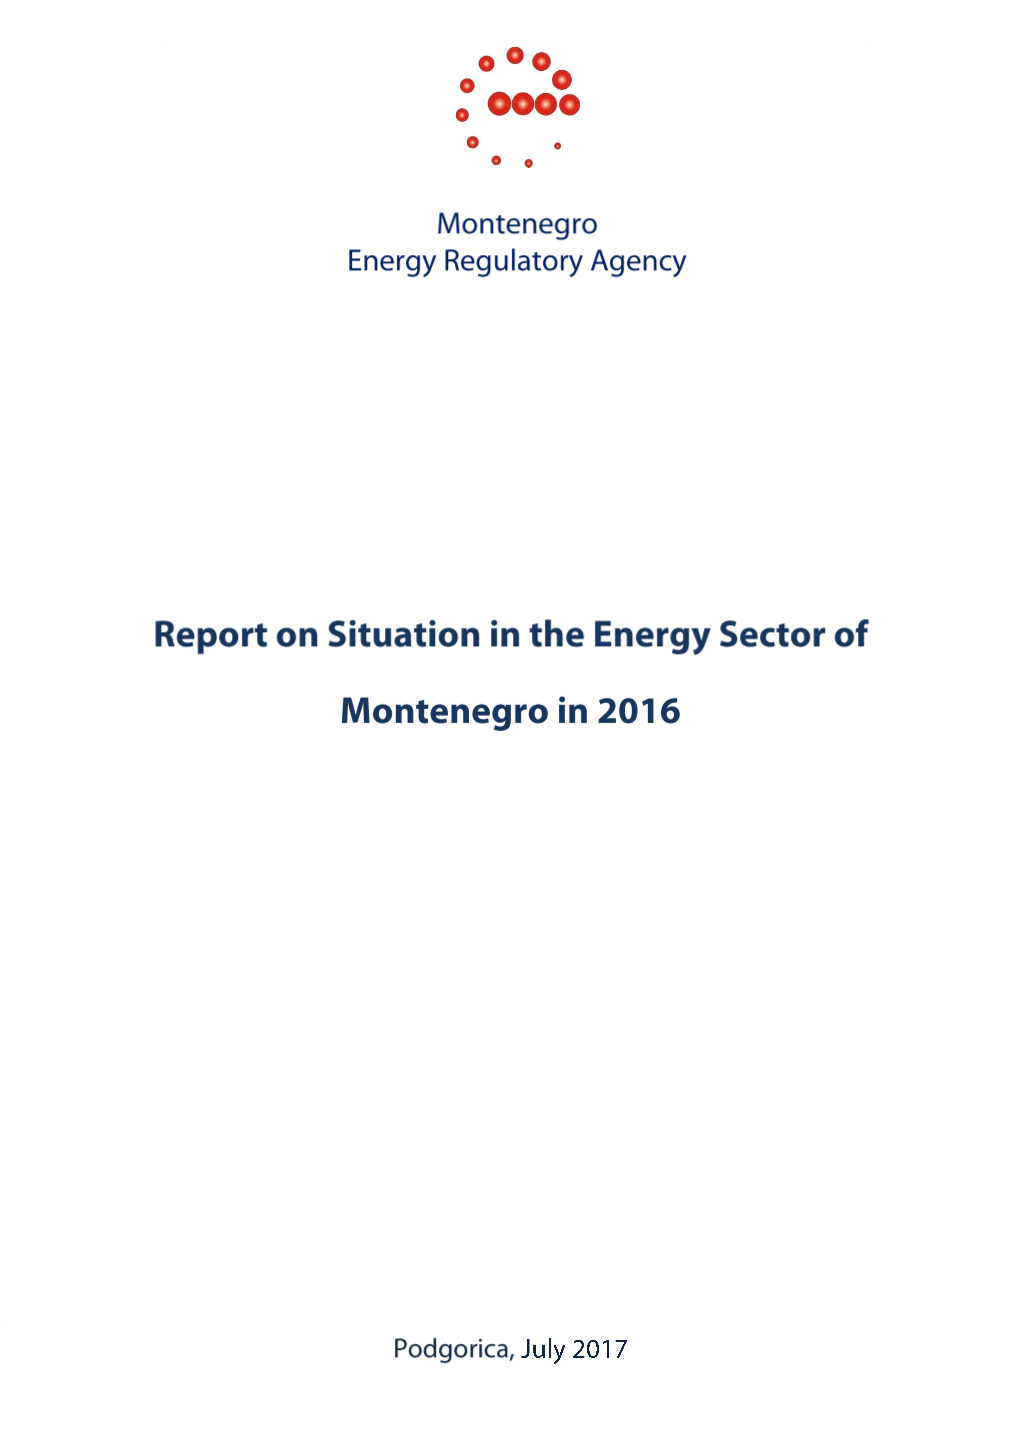 Report on Situation in the Energy Sector of Montenegro for 2016